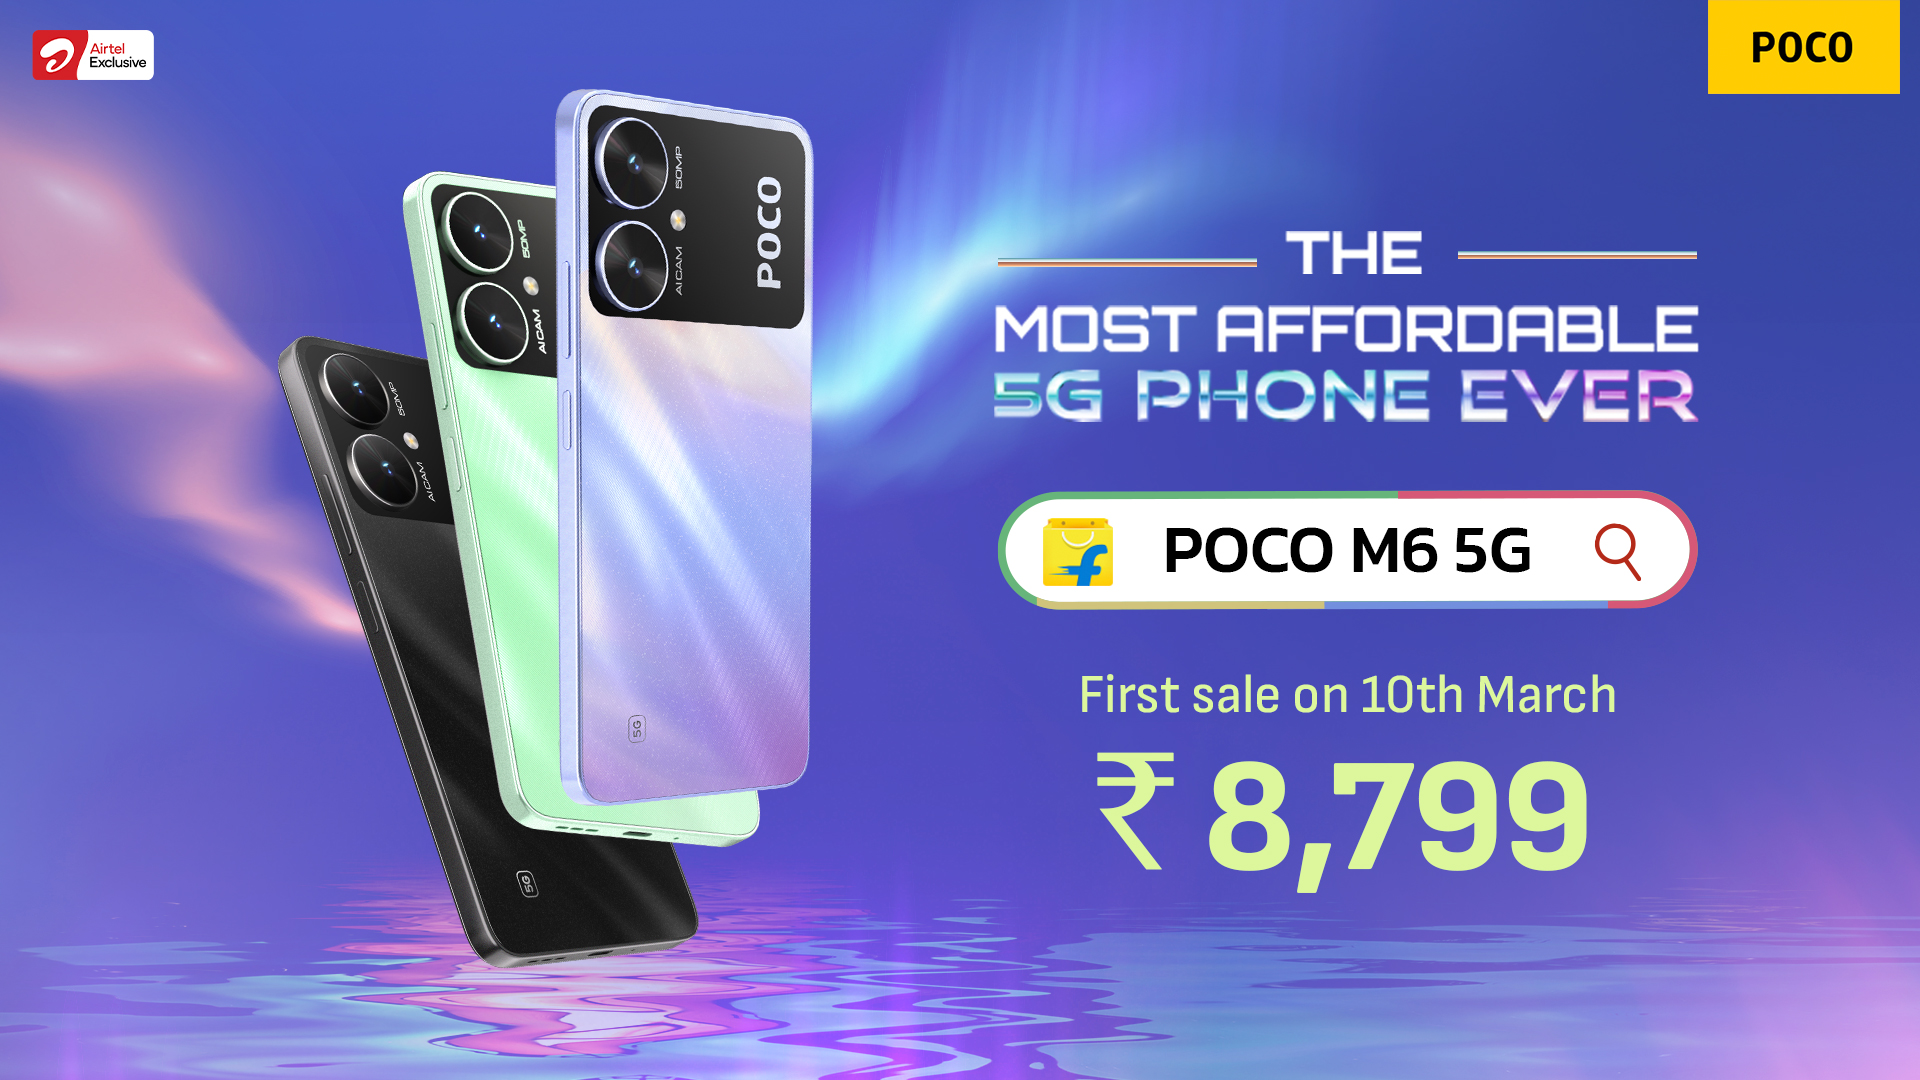 Poco names M6 5G as ‘the most affordable 5G phone ever after new Airtel partnership